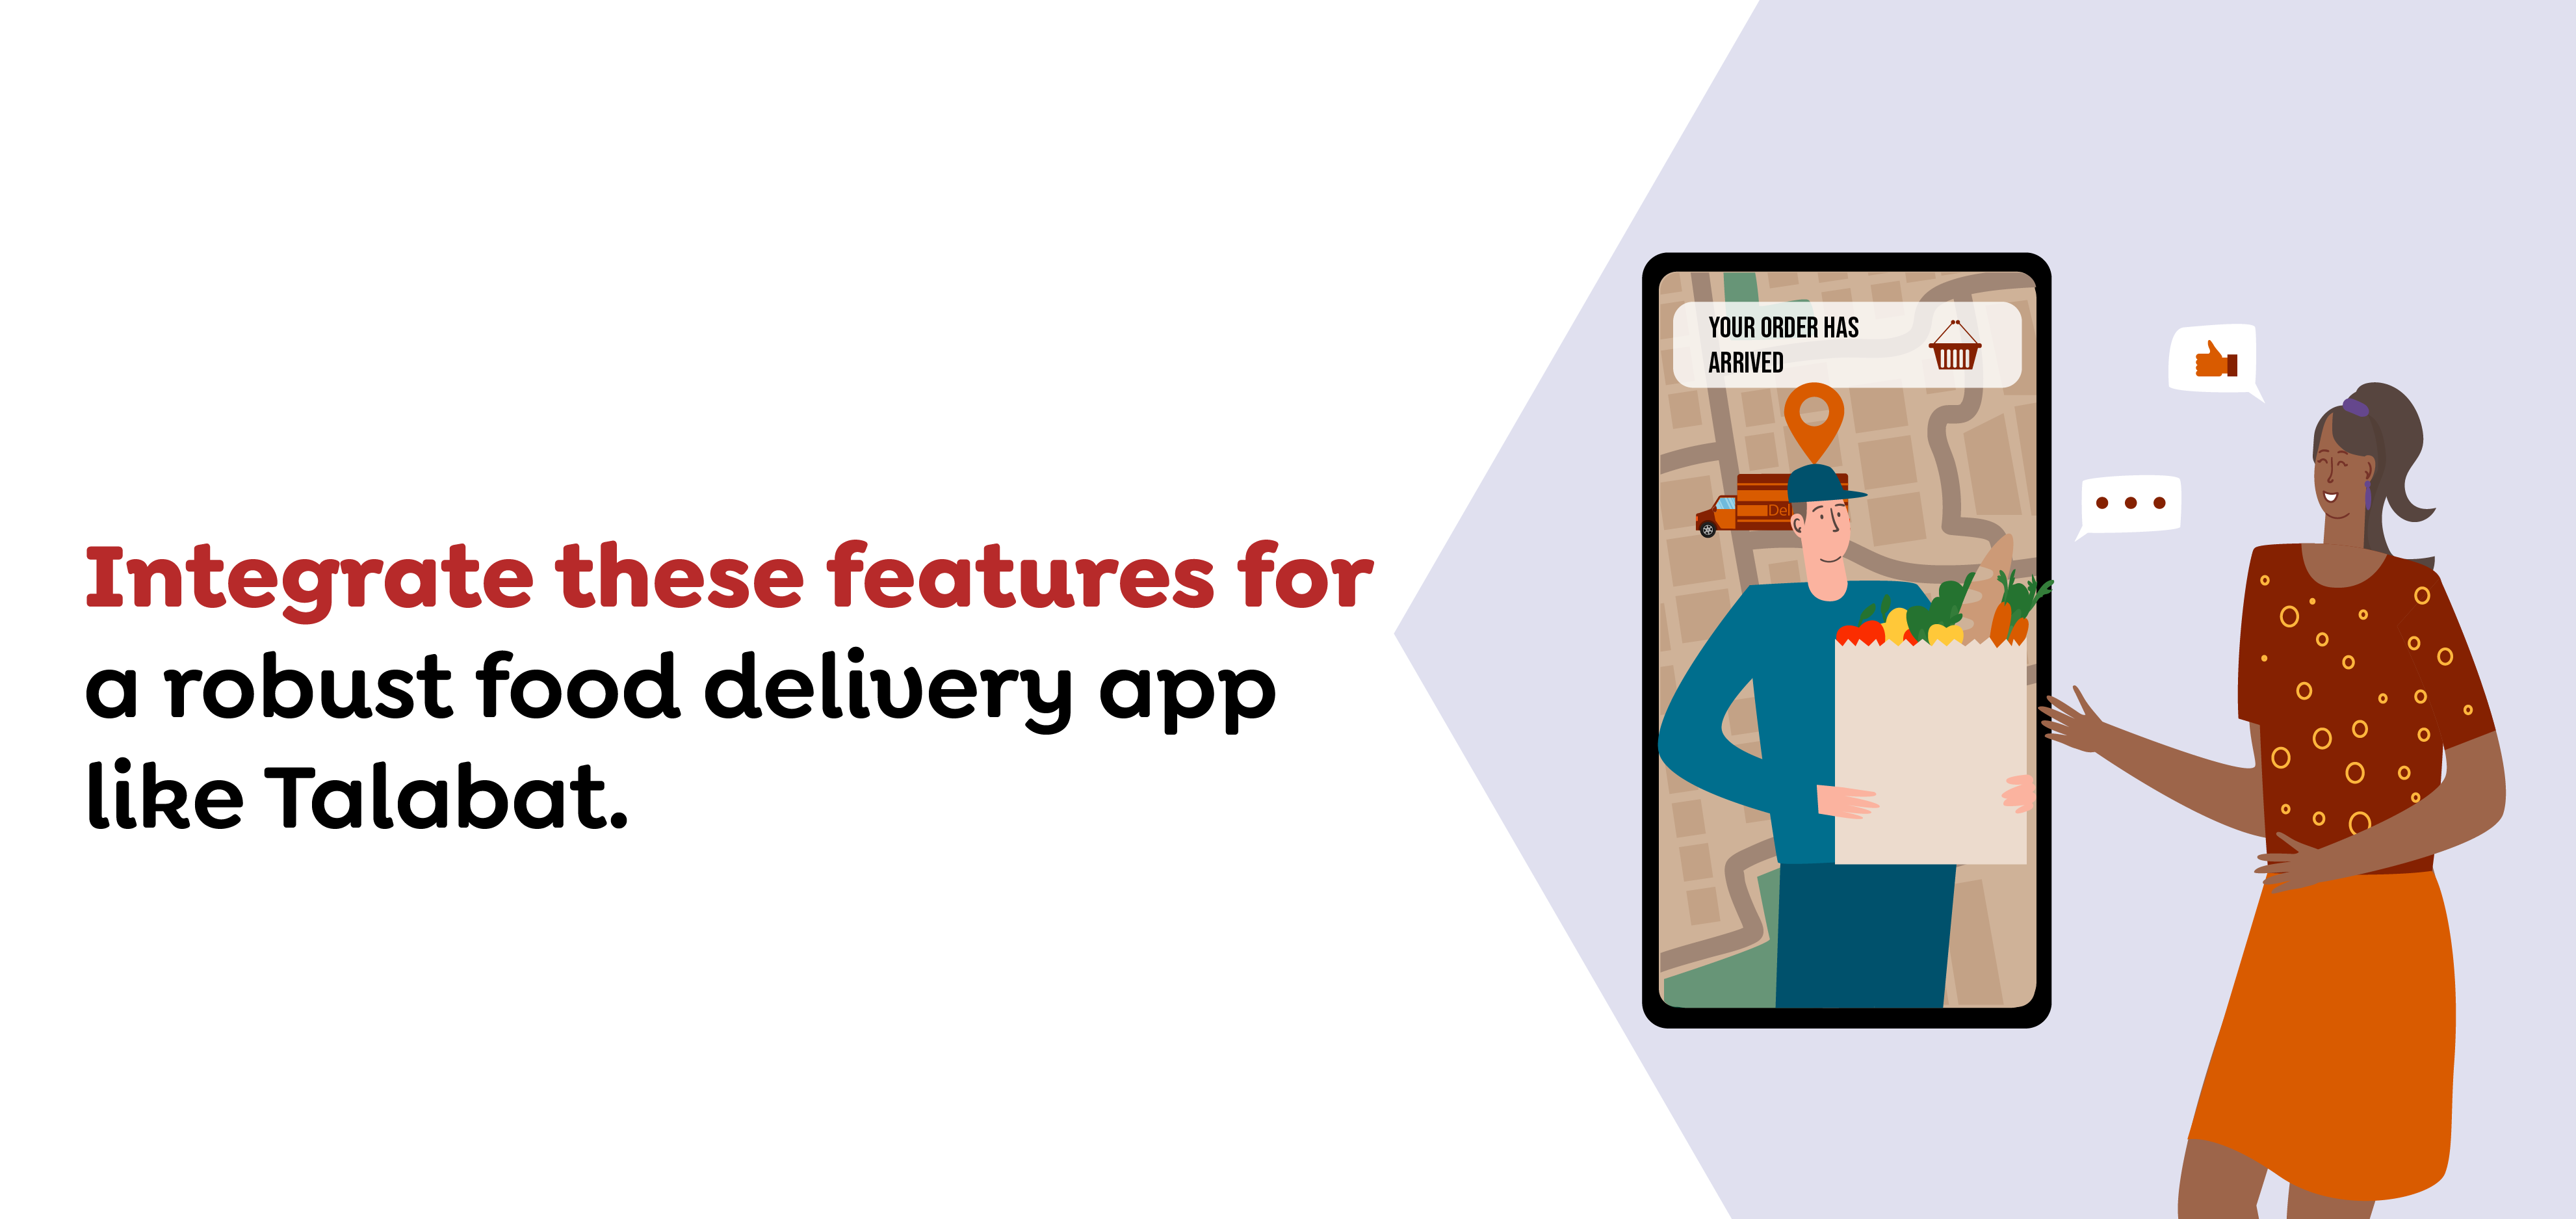 Integrate these features for a robust food delivery app like Talabat